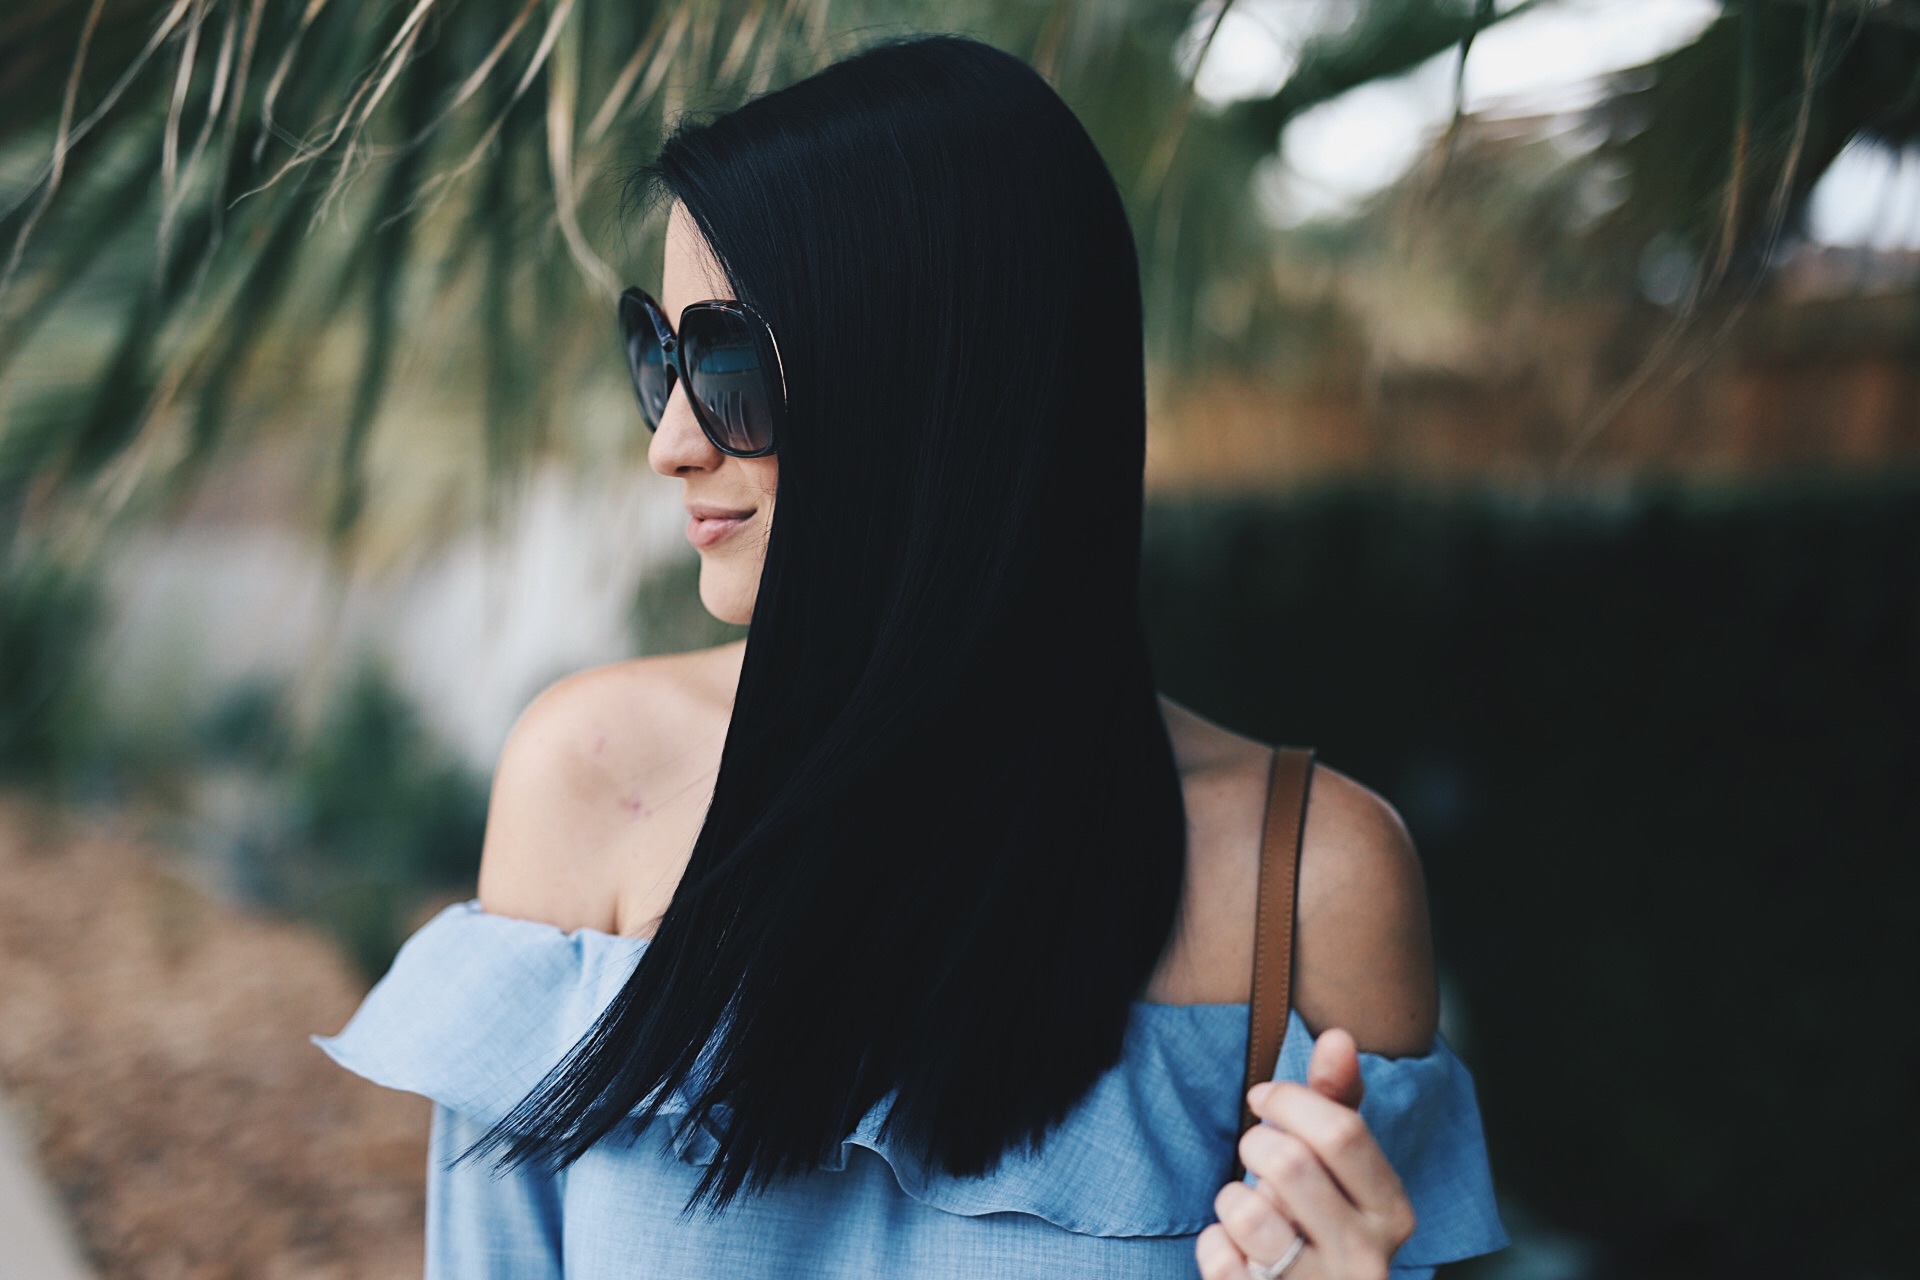 DTKAustin is sharing why she can't live without the new Pantene Pro-V Classic Clean Shampoo & Conditioner. See why she's now washing her hair everyday and never regretting her decision! Click for more information and images of her sleek straight hair!